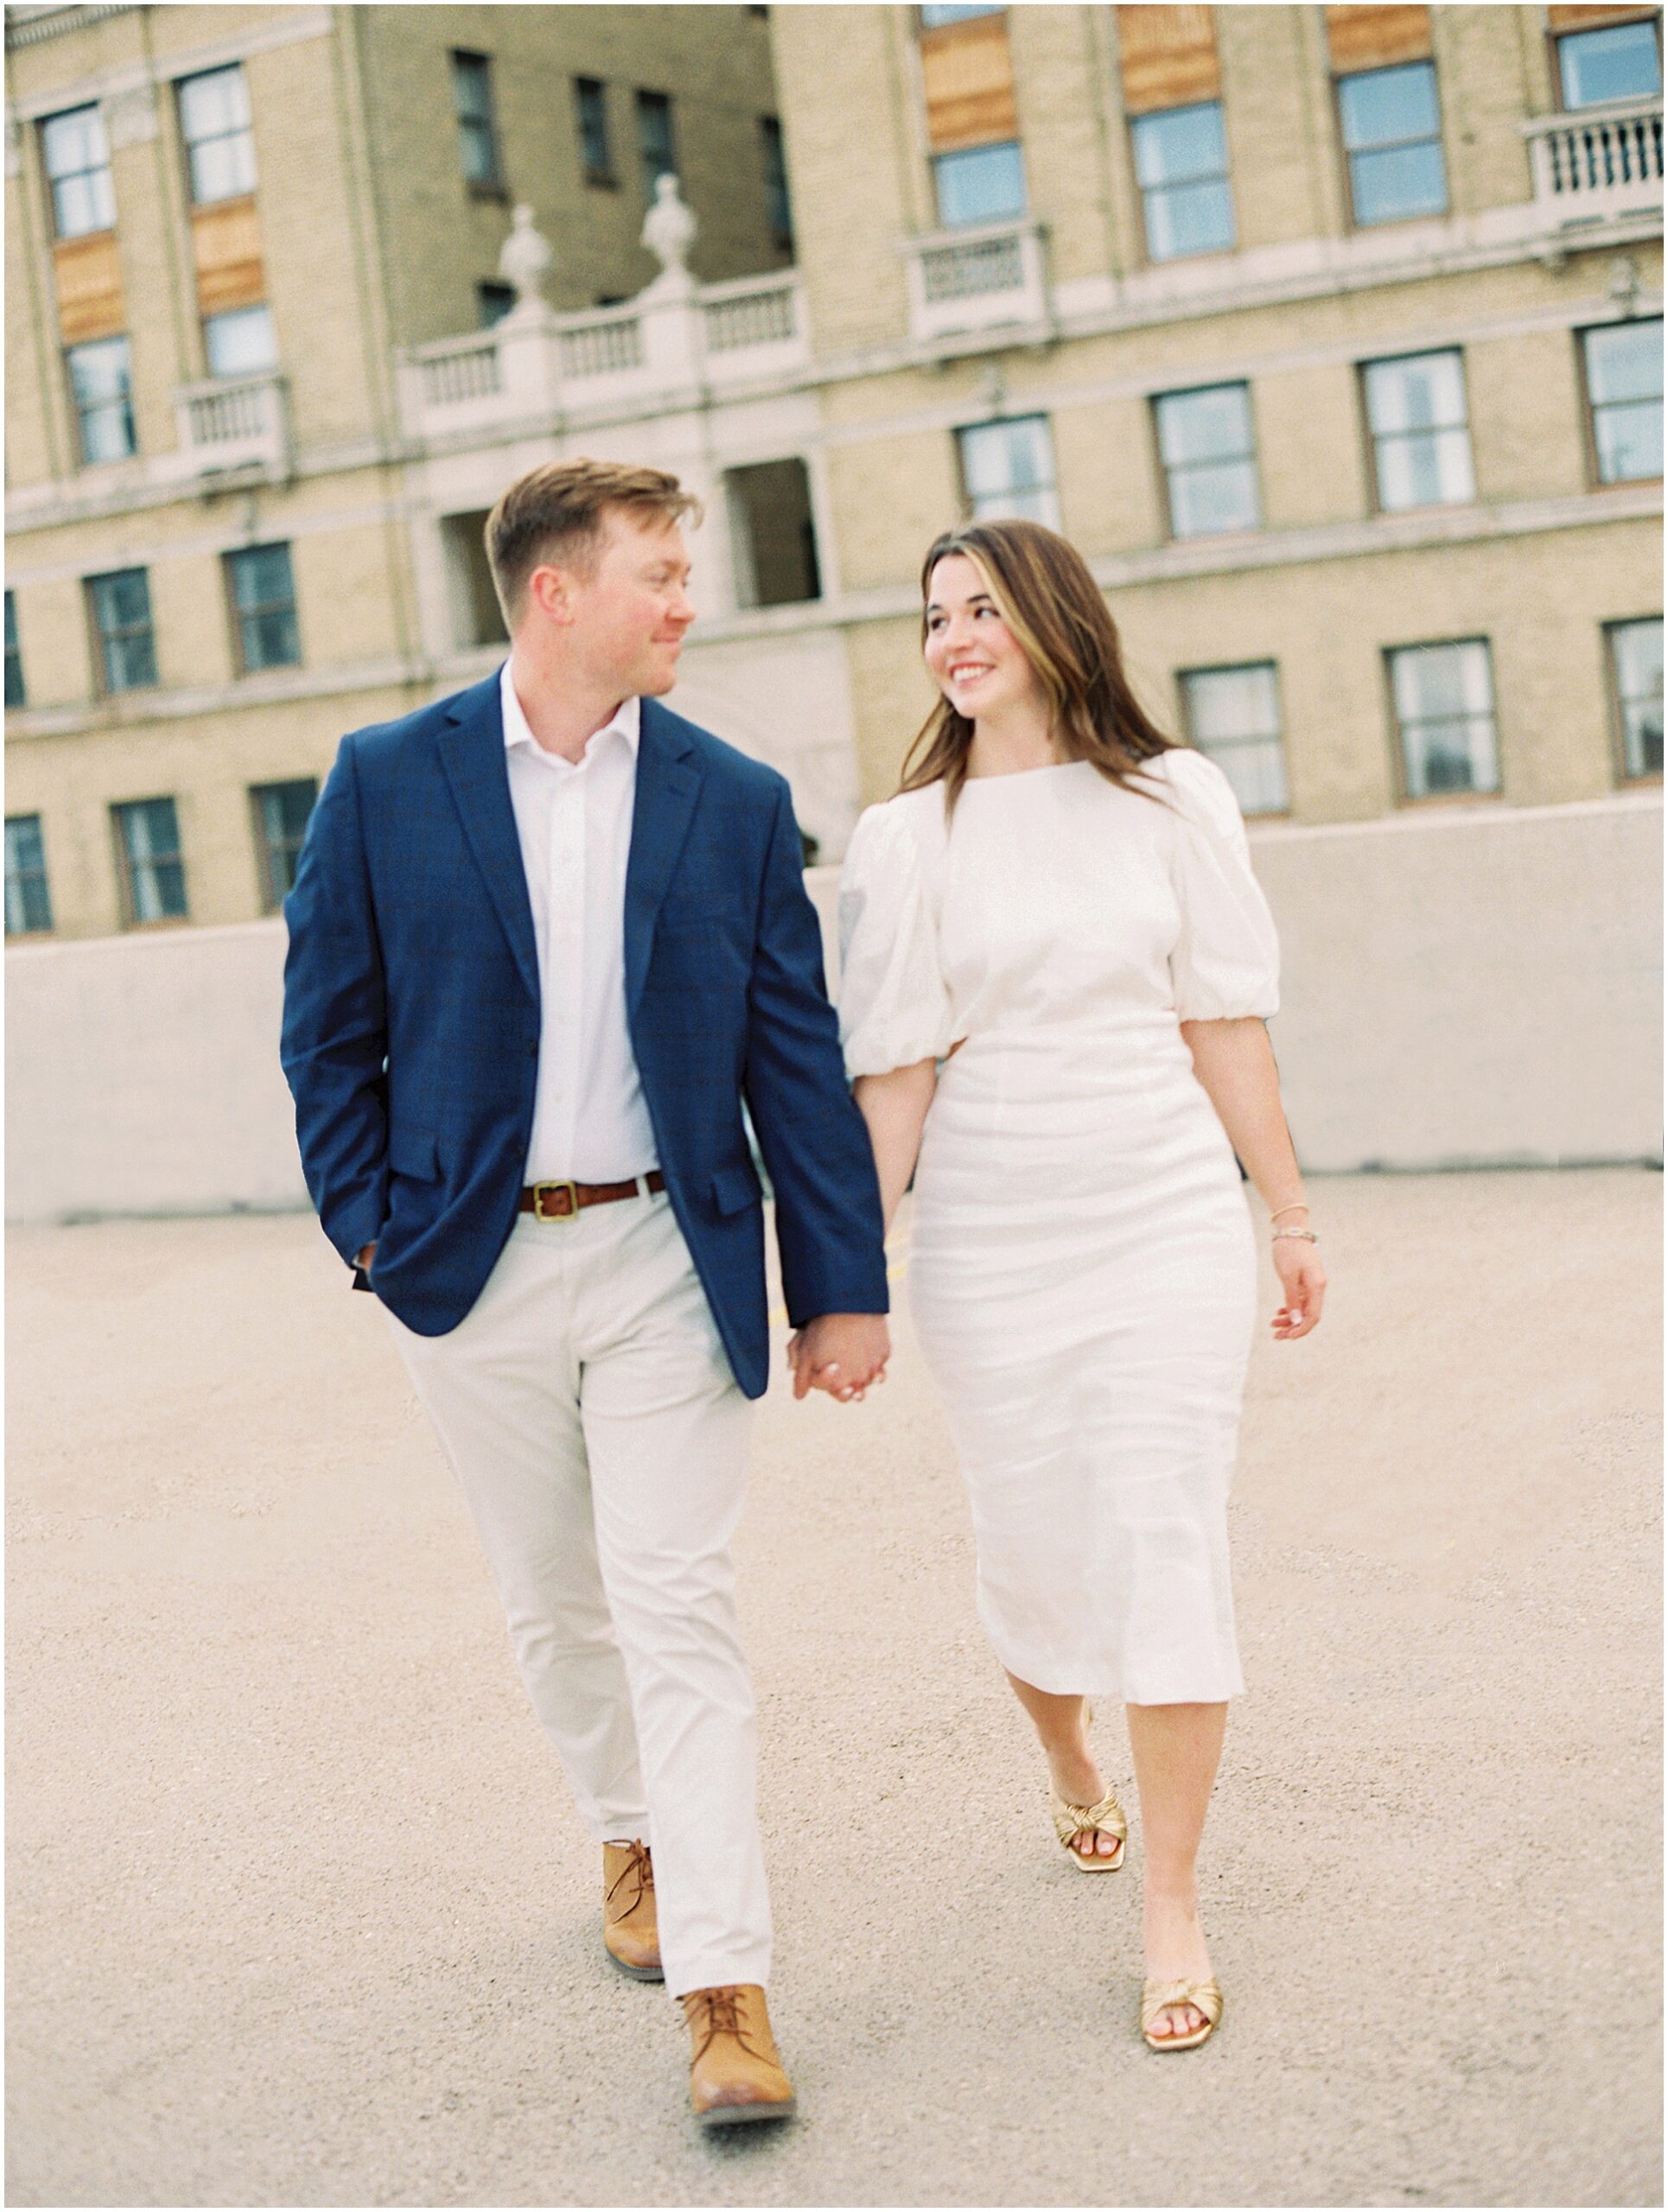 Urban Romance: Catherine and Jack Embrace Against Downtown Dallas Backdrop